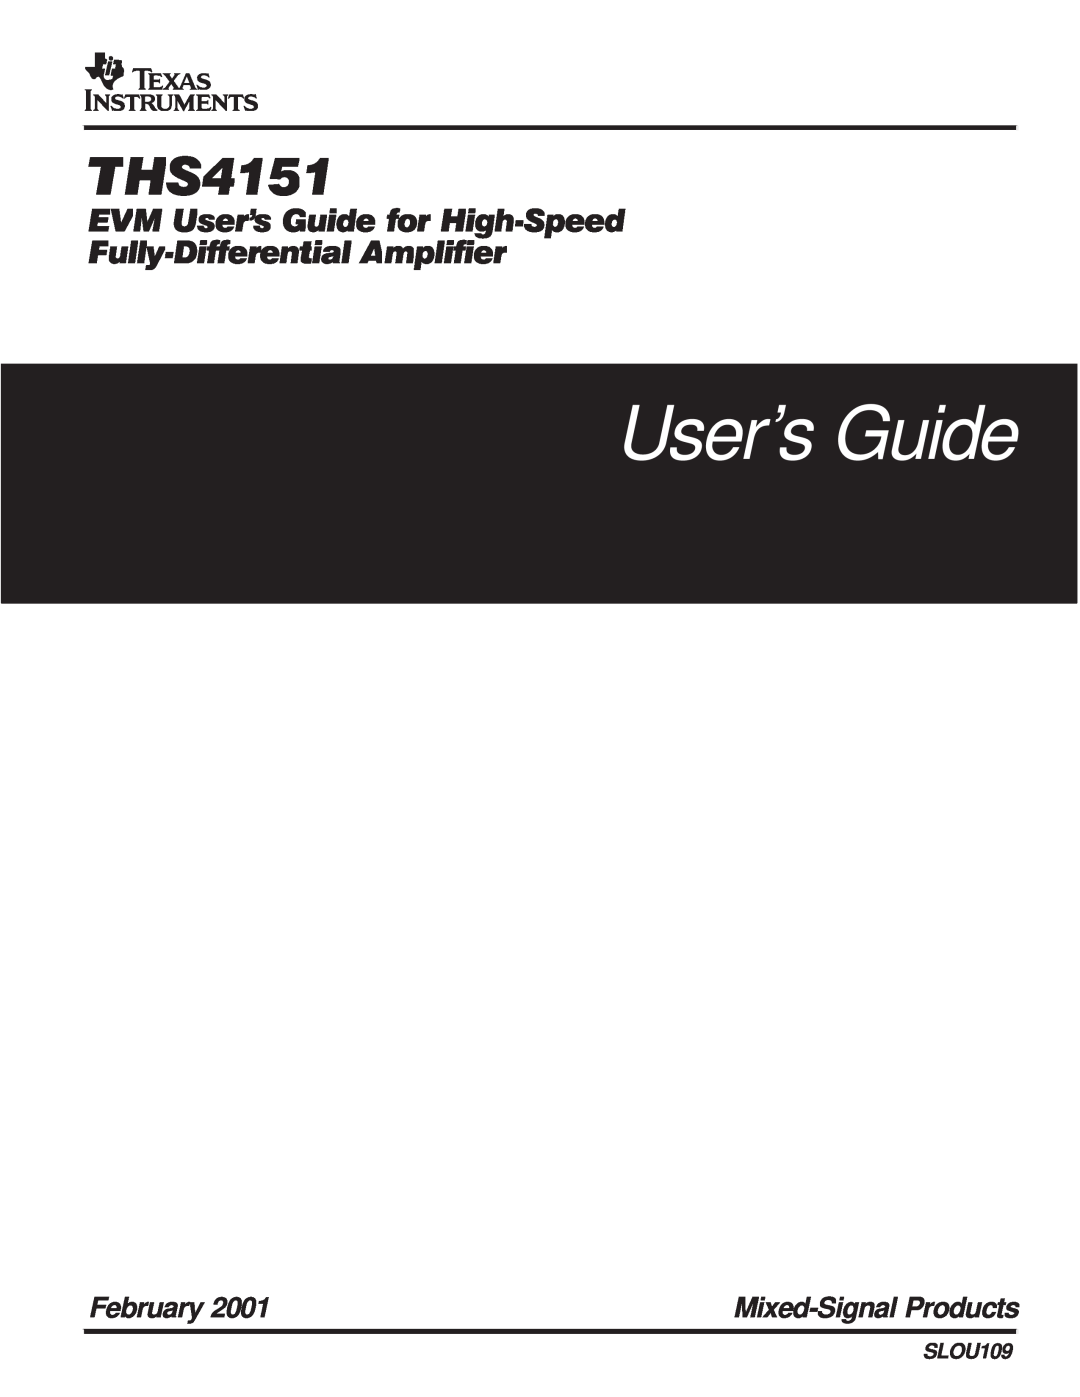 Texas Instruments THS4151 manual EVM Users Guide for High!Speed, Fully!Differential Amplifier, February, SLOU109 